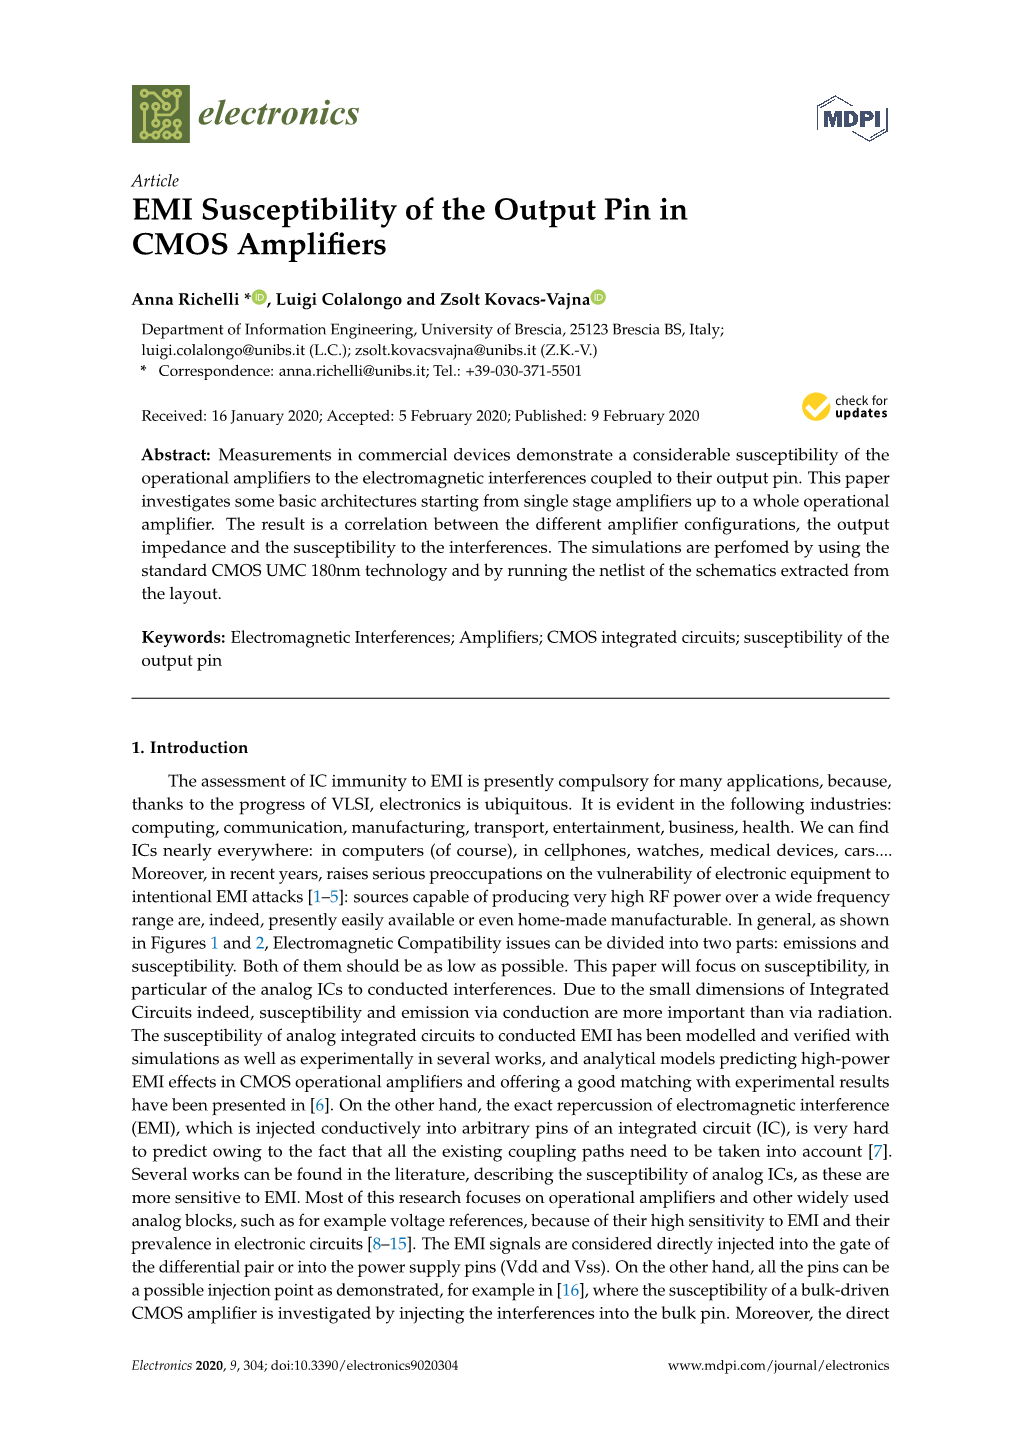 EMI Susceptibility of the Output Pin in CMOS Amplifiers